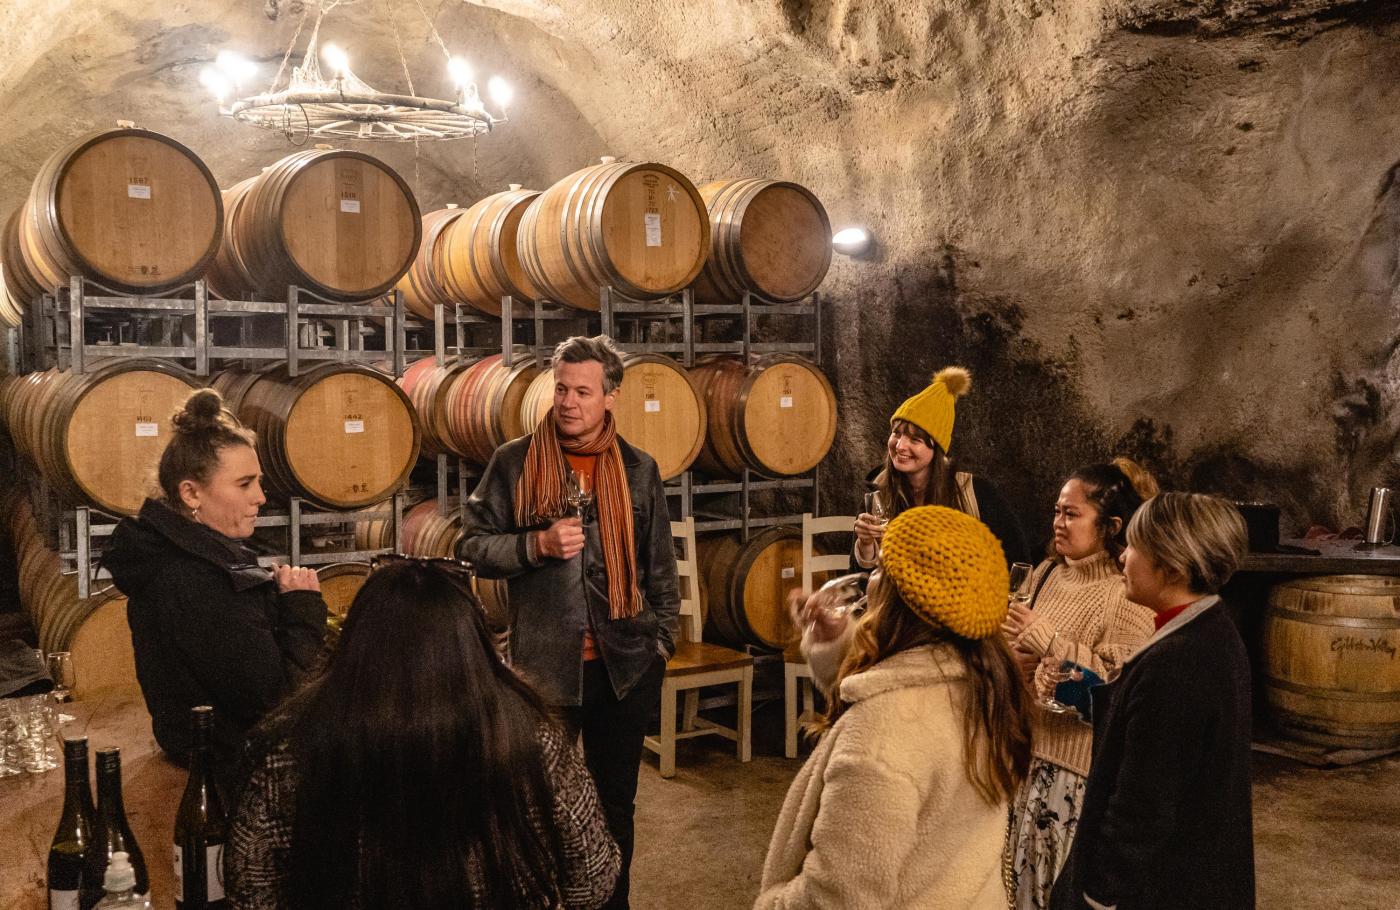 Group of people on a wine tour in an underground wine cave with wine barrels around